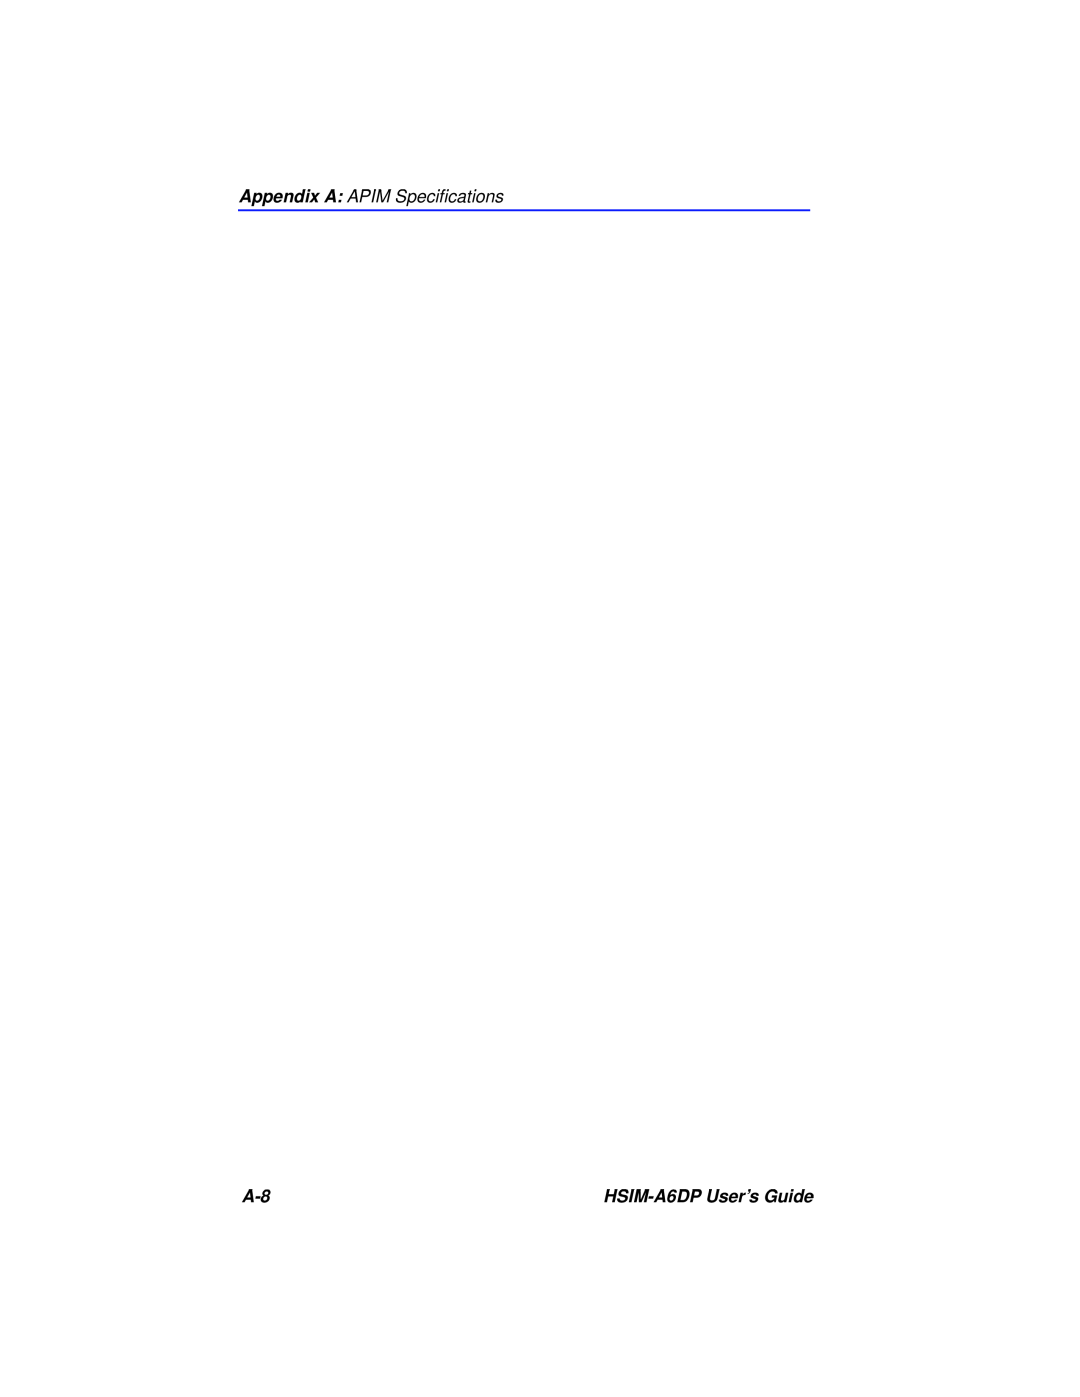 Cabletron Systems manual Appendix A APIM Speciﬁcations, HSIM-A6DP User’s Guide 